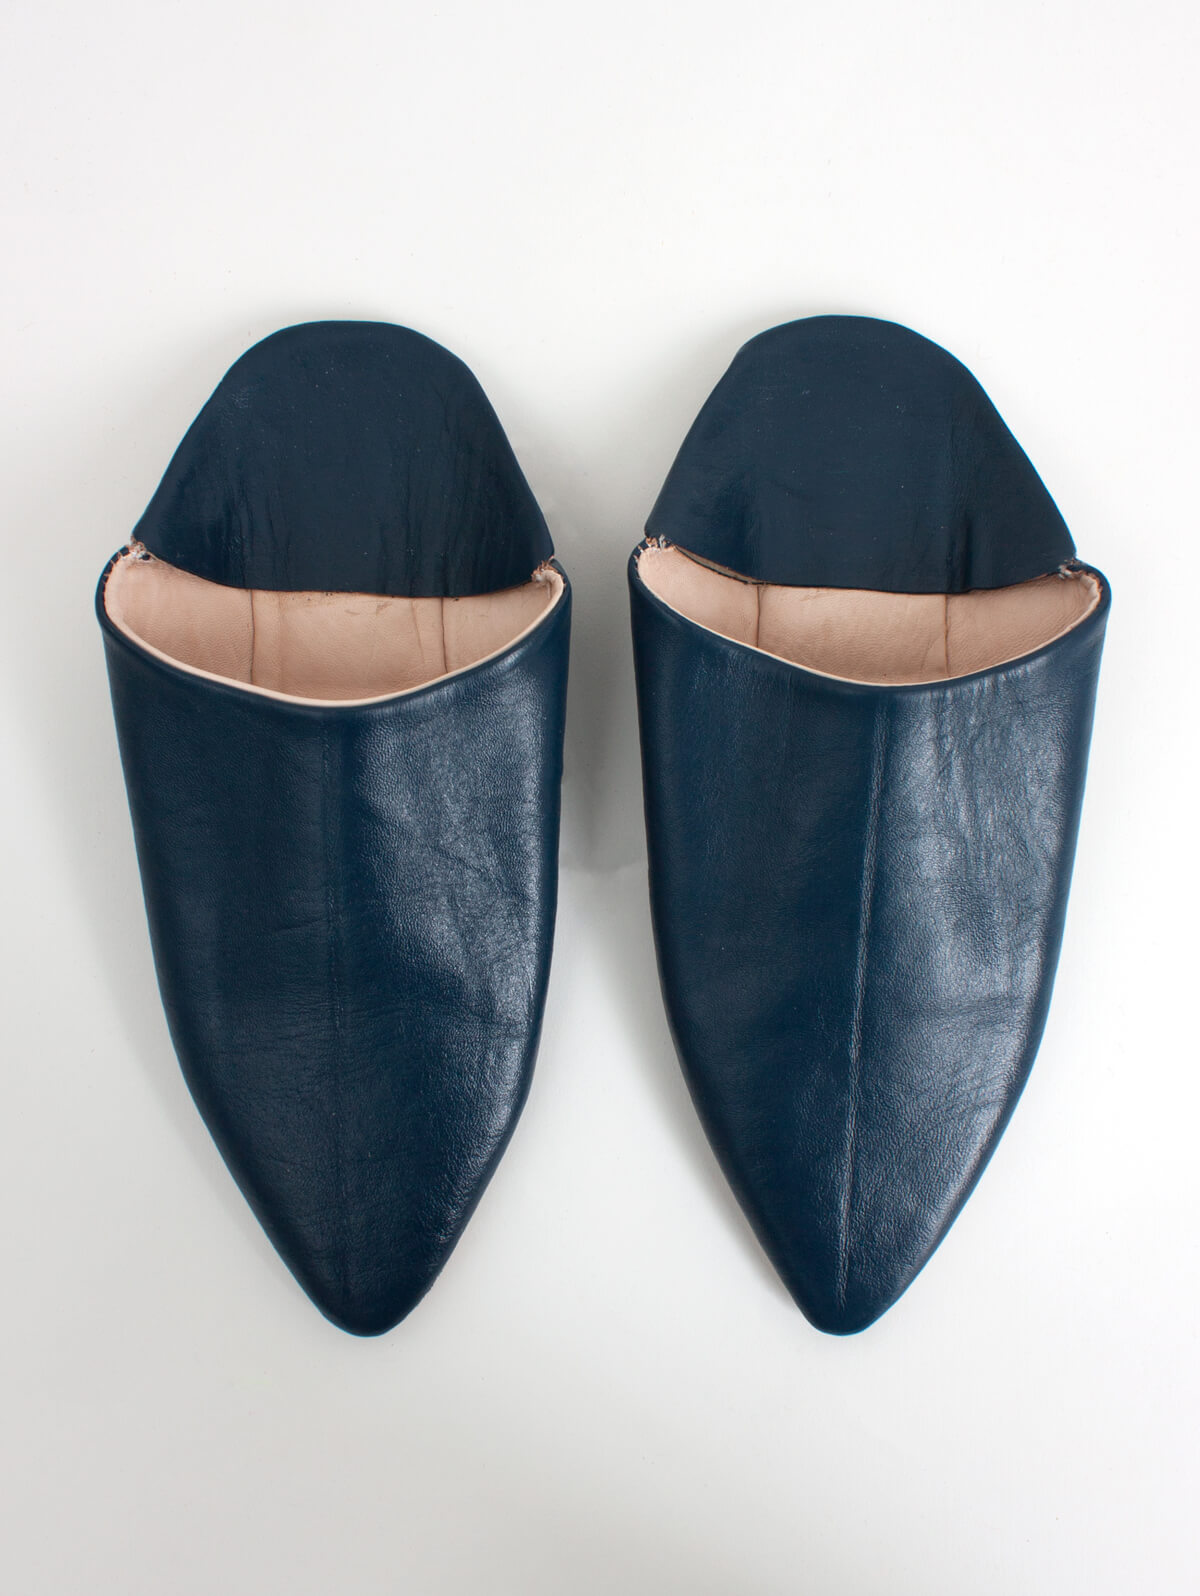 Moroccan Classic Pointed Babouche Slippers, Indigo